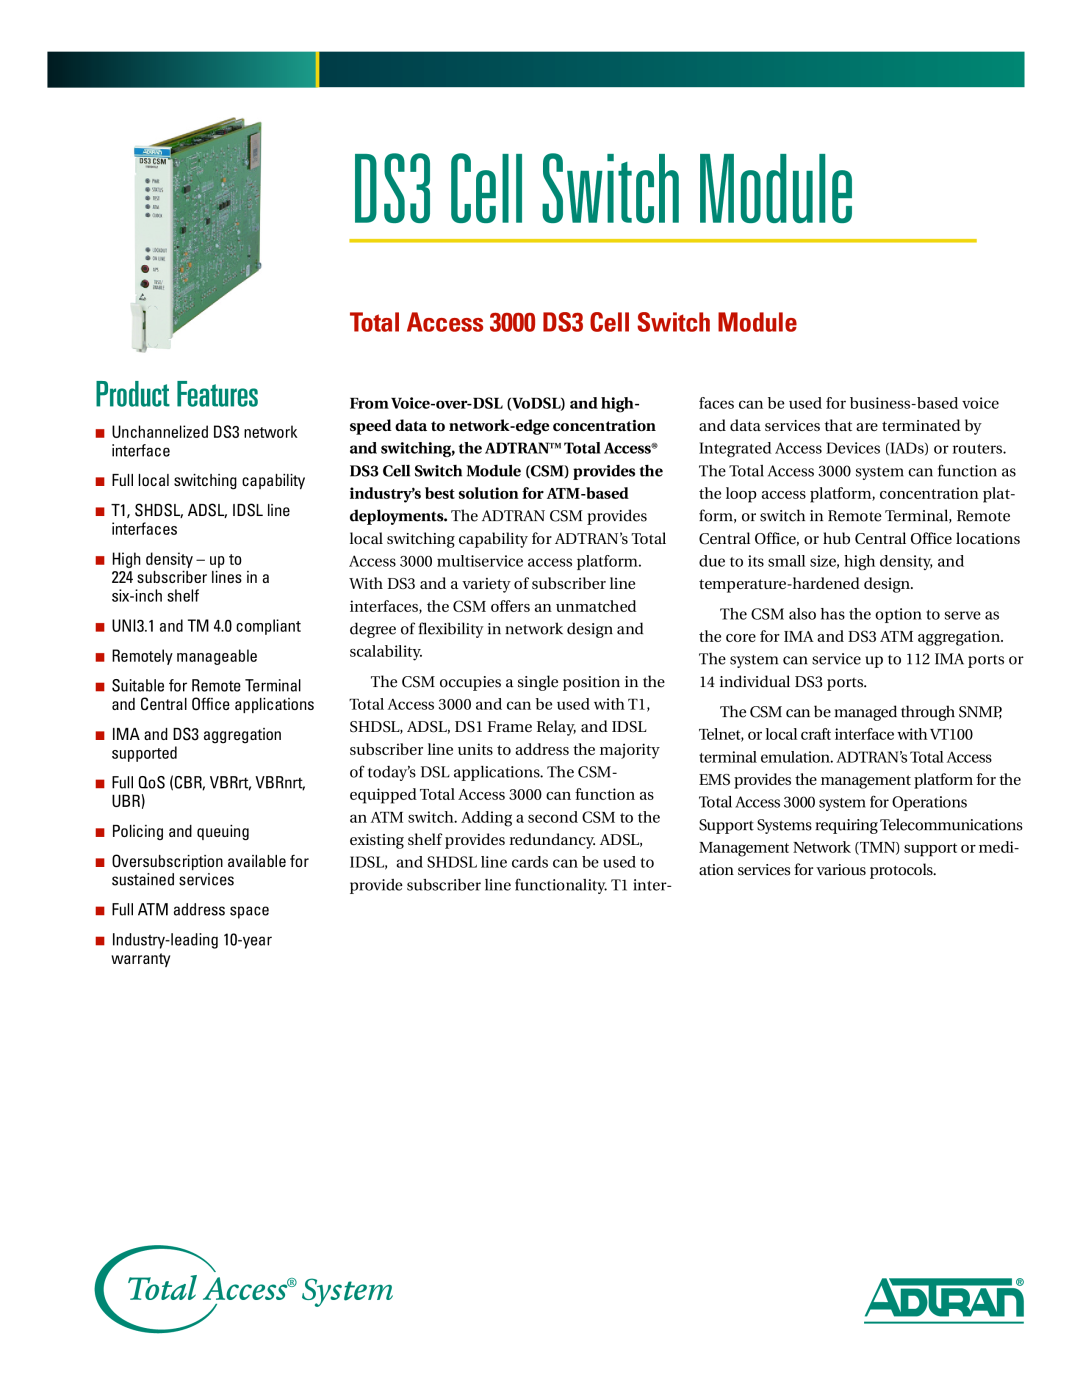 ADTRAN warranty Total Access 3000 DS3 Cell Switch Module, Product Features, Remotely manageable, Policing and queuing 